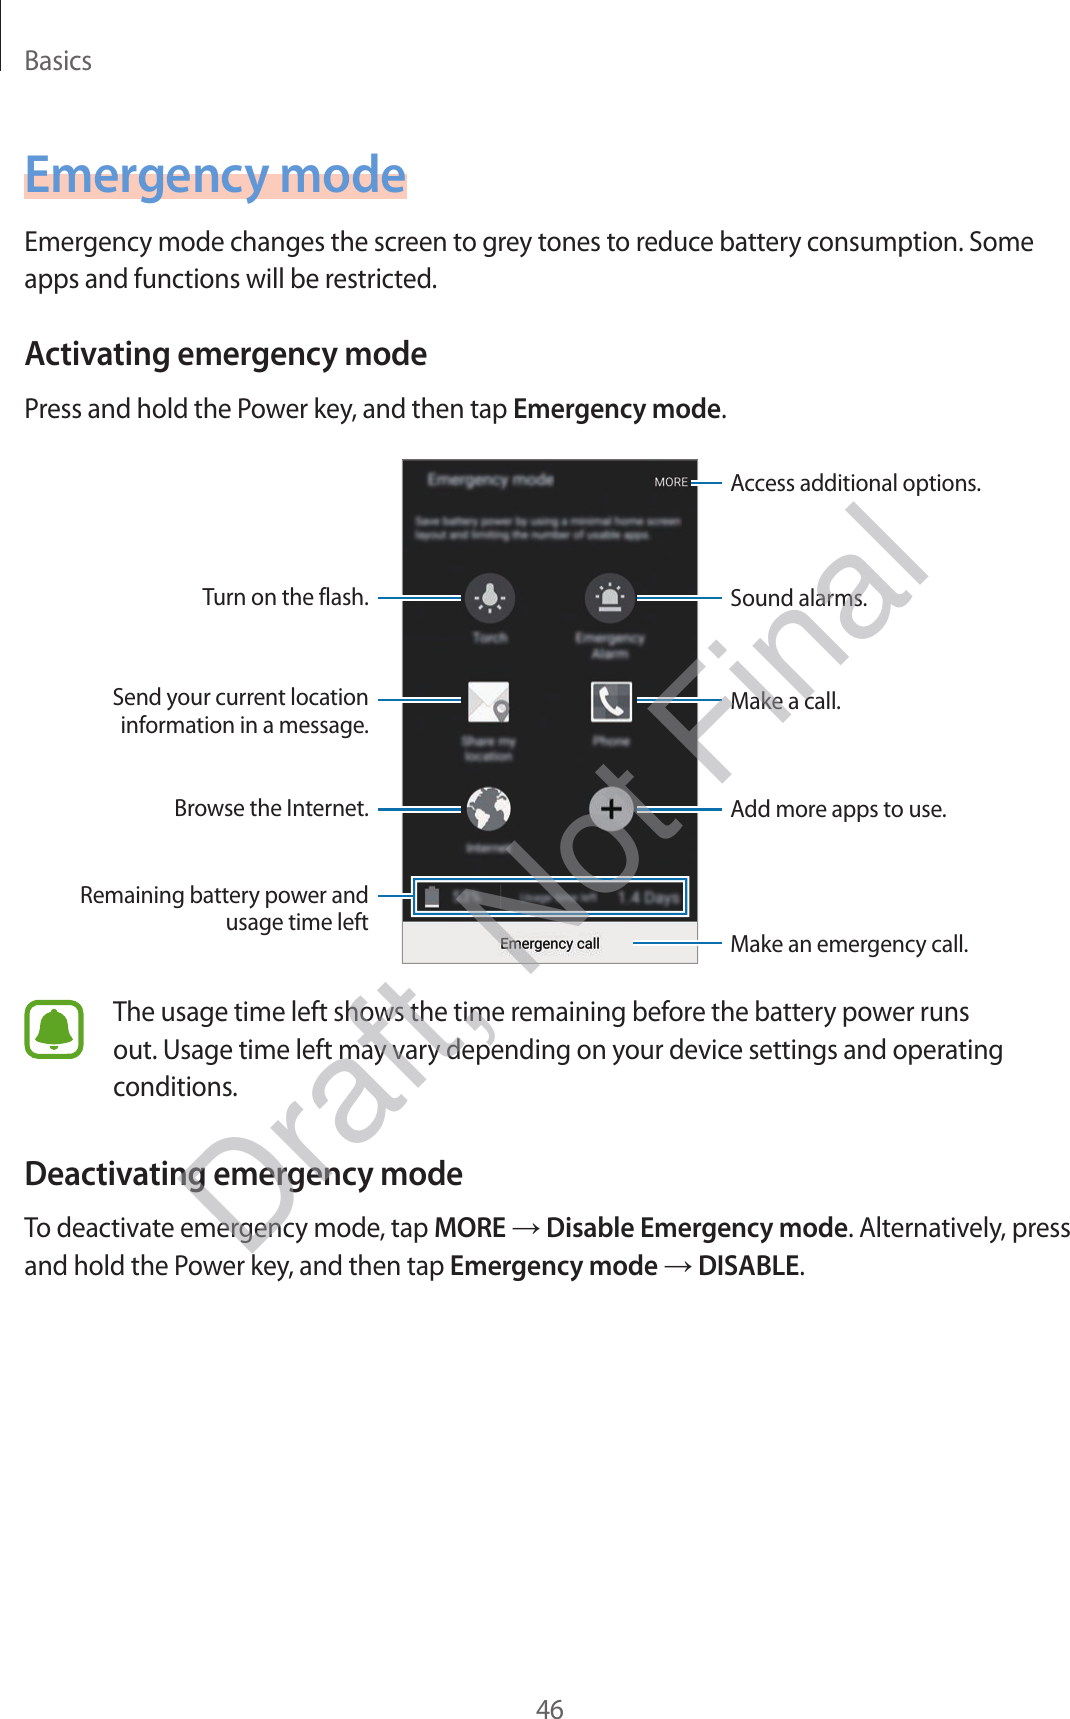 Basics46Emergency modeEmergency mode changes the screen to grey tones to reduce battery consumption. Some apps and functions will be restricted.Activating emergency modePress and hold the Power key, and then tap Emergency mode.Add more apps to use.Make an emergency call.Remaining battery power and usage time leftTurn on the flash.Make a call.Send your current location information in a message.Browse the Internet.Access additional options.Sound alarms.The usage time left shows the time remaining before the battery power runs out. Usage time left may vary depending on your device settings and operating conditions.Deactivating emergency modeTo deactivate emergency mode, tap MORE → Disable Emergency mode. Alternatively, press and hold the Power key, and then tap Emergency mode → DISABLE.Draft, Not Final